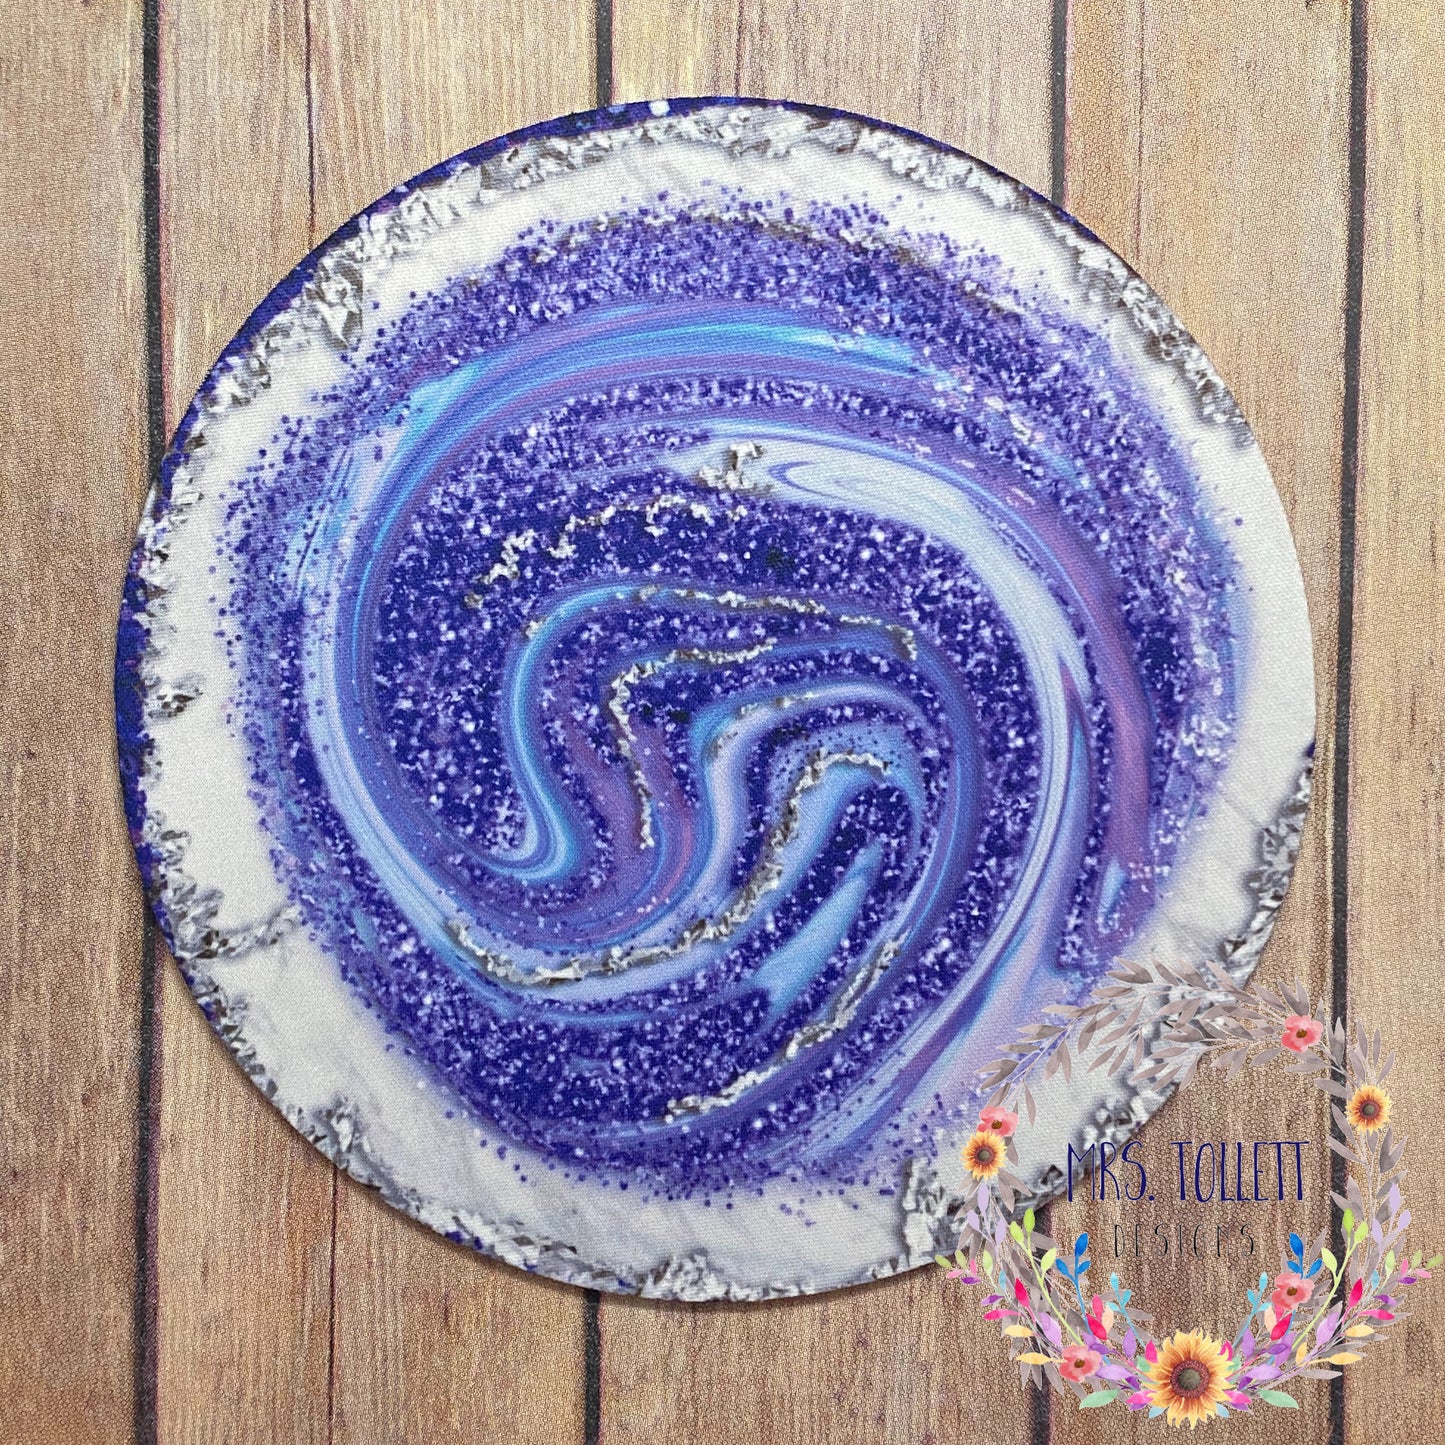 Purple Geode Round Rubber Backed Mousepad, Top view, Printed Purple agate and shimmer design | Mrs Tollett Designs